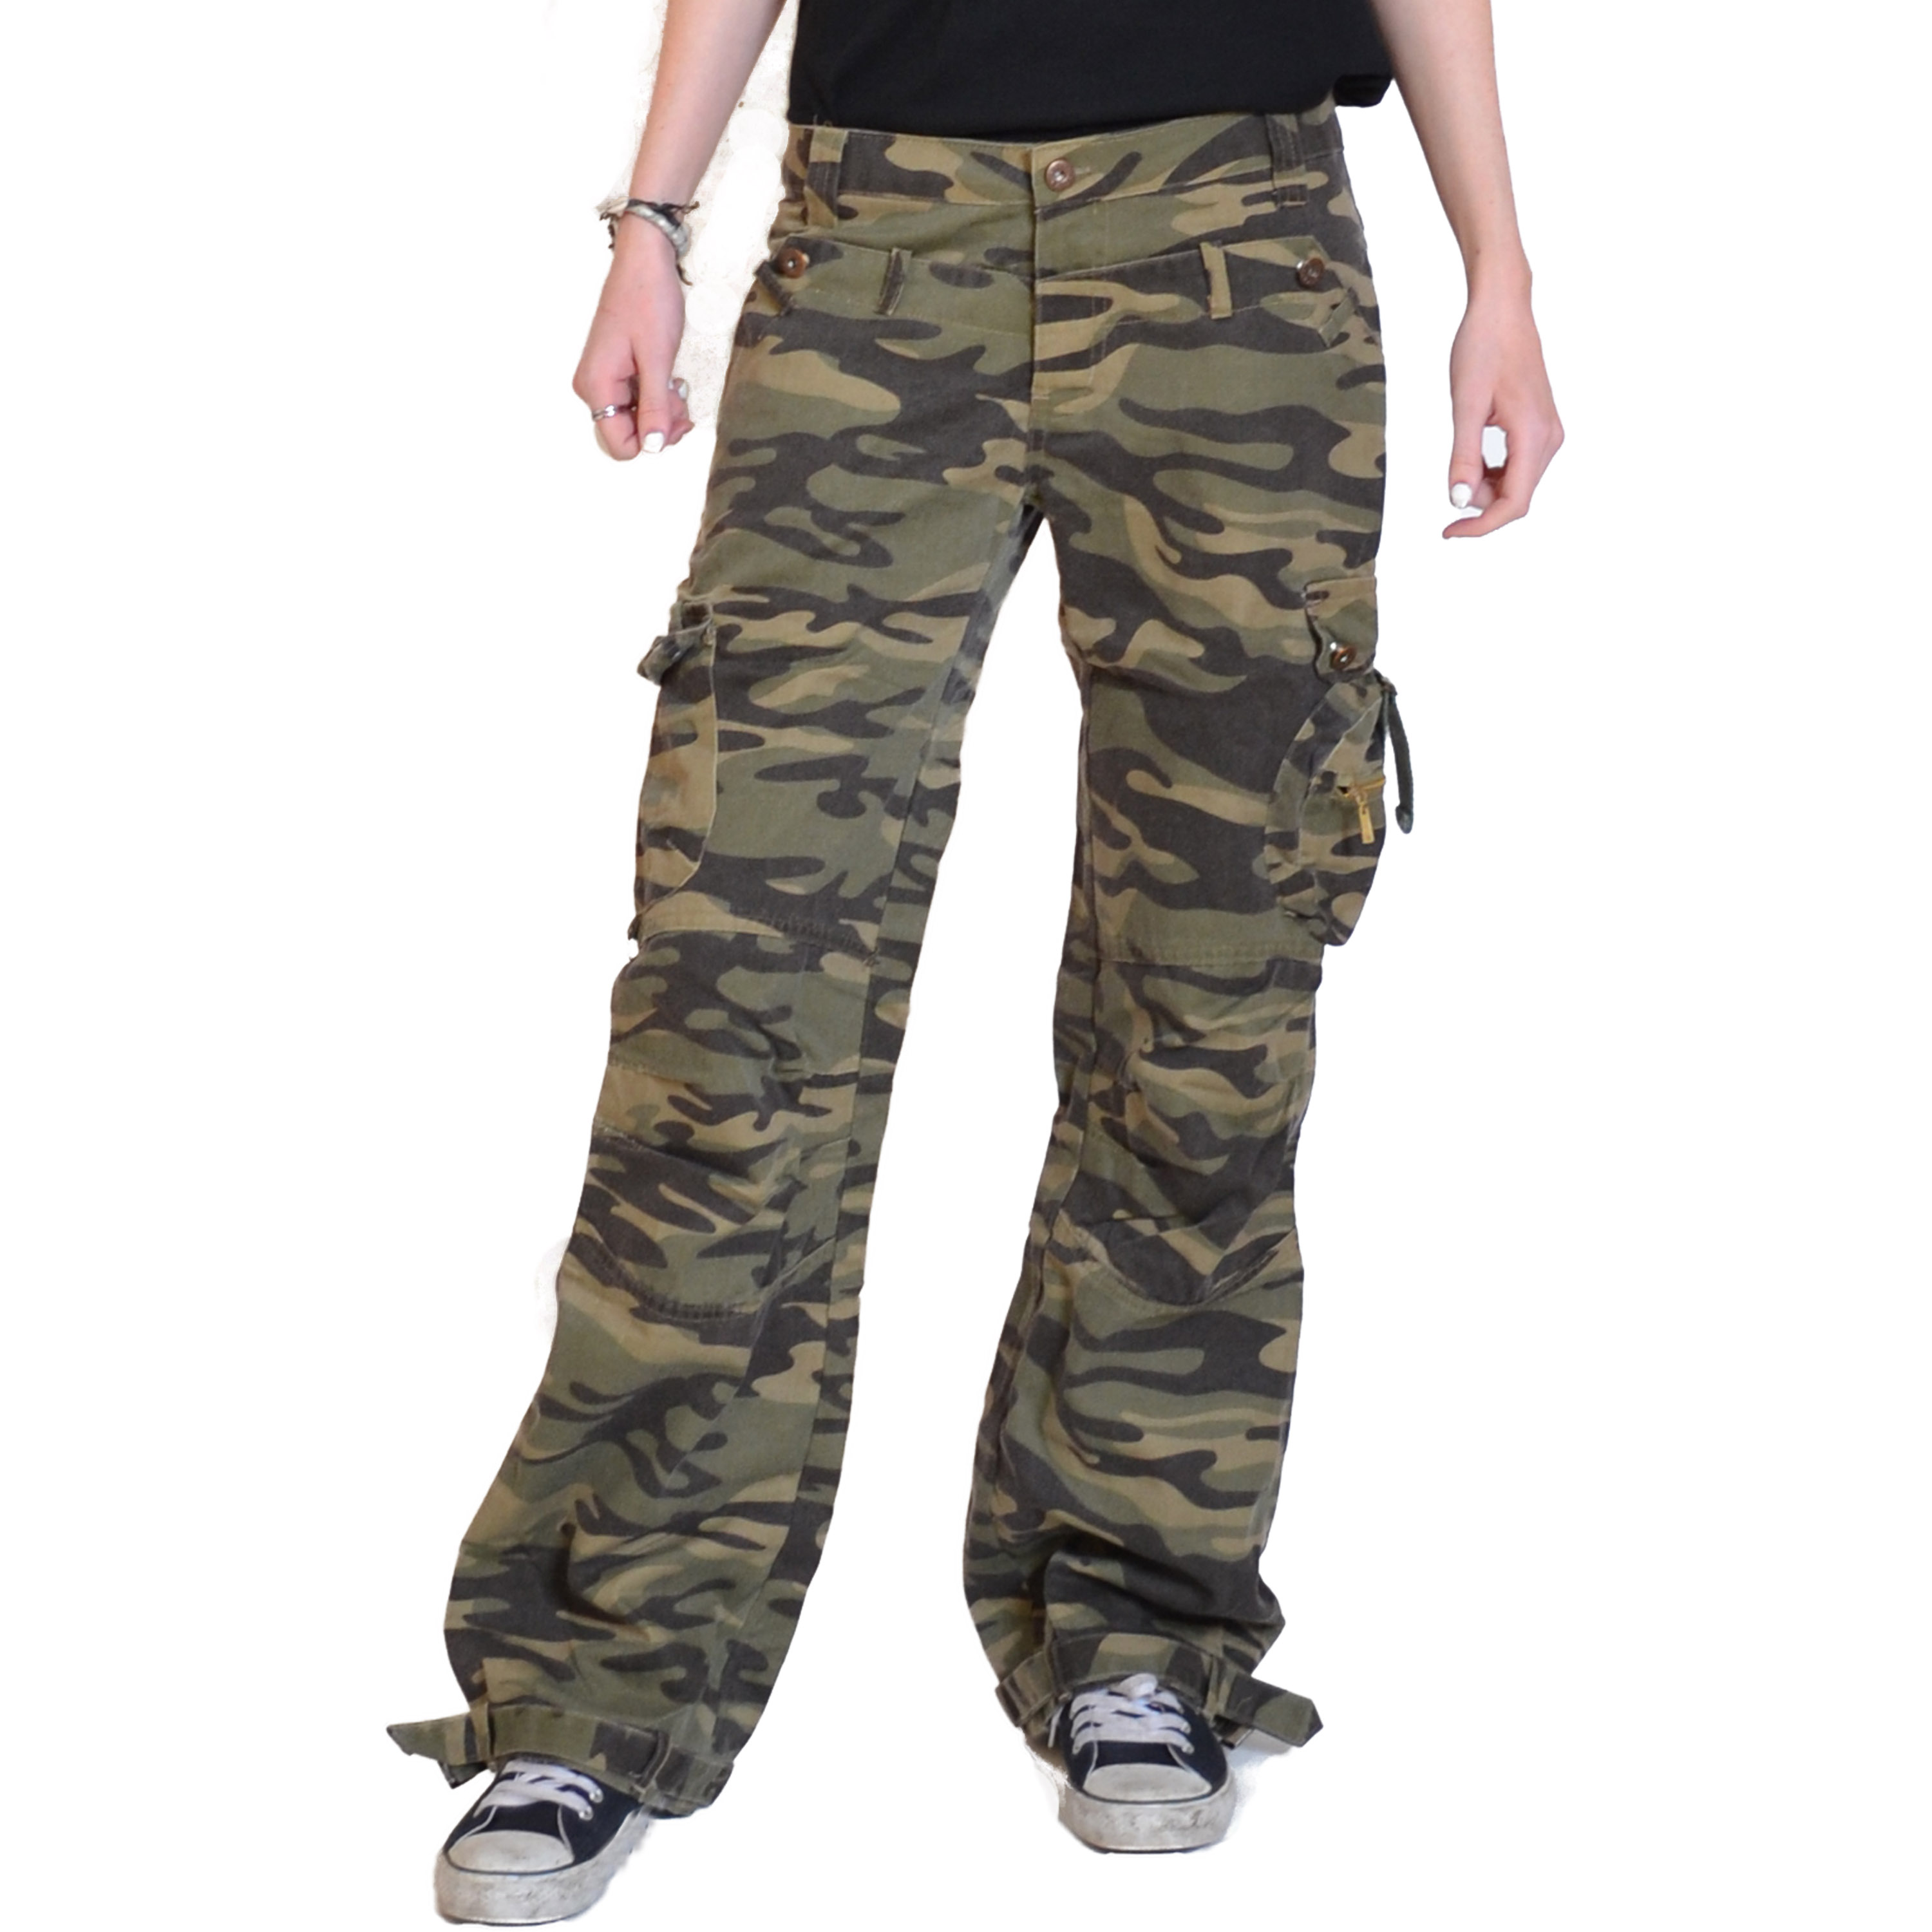 New Womens Army Green Military Camouflage Cargo Combat Pants Jeans Wide ...